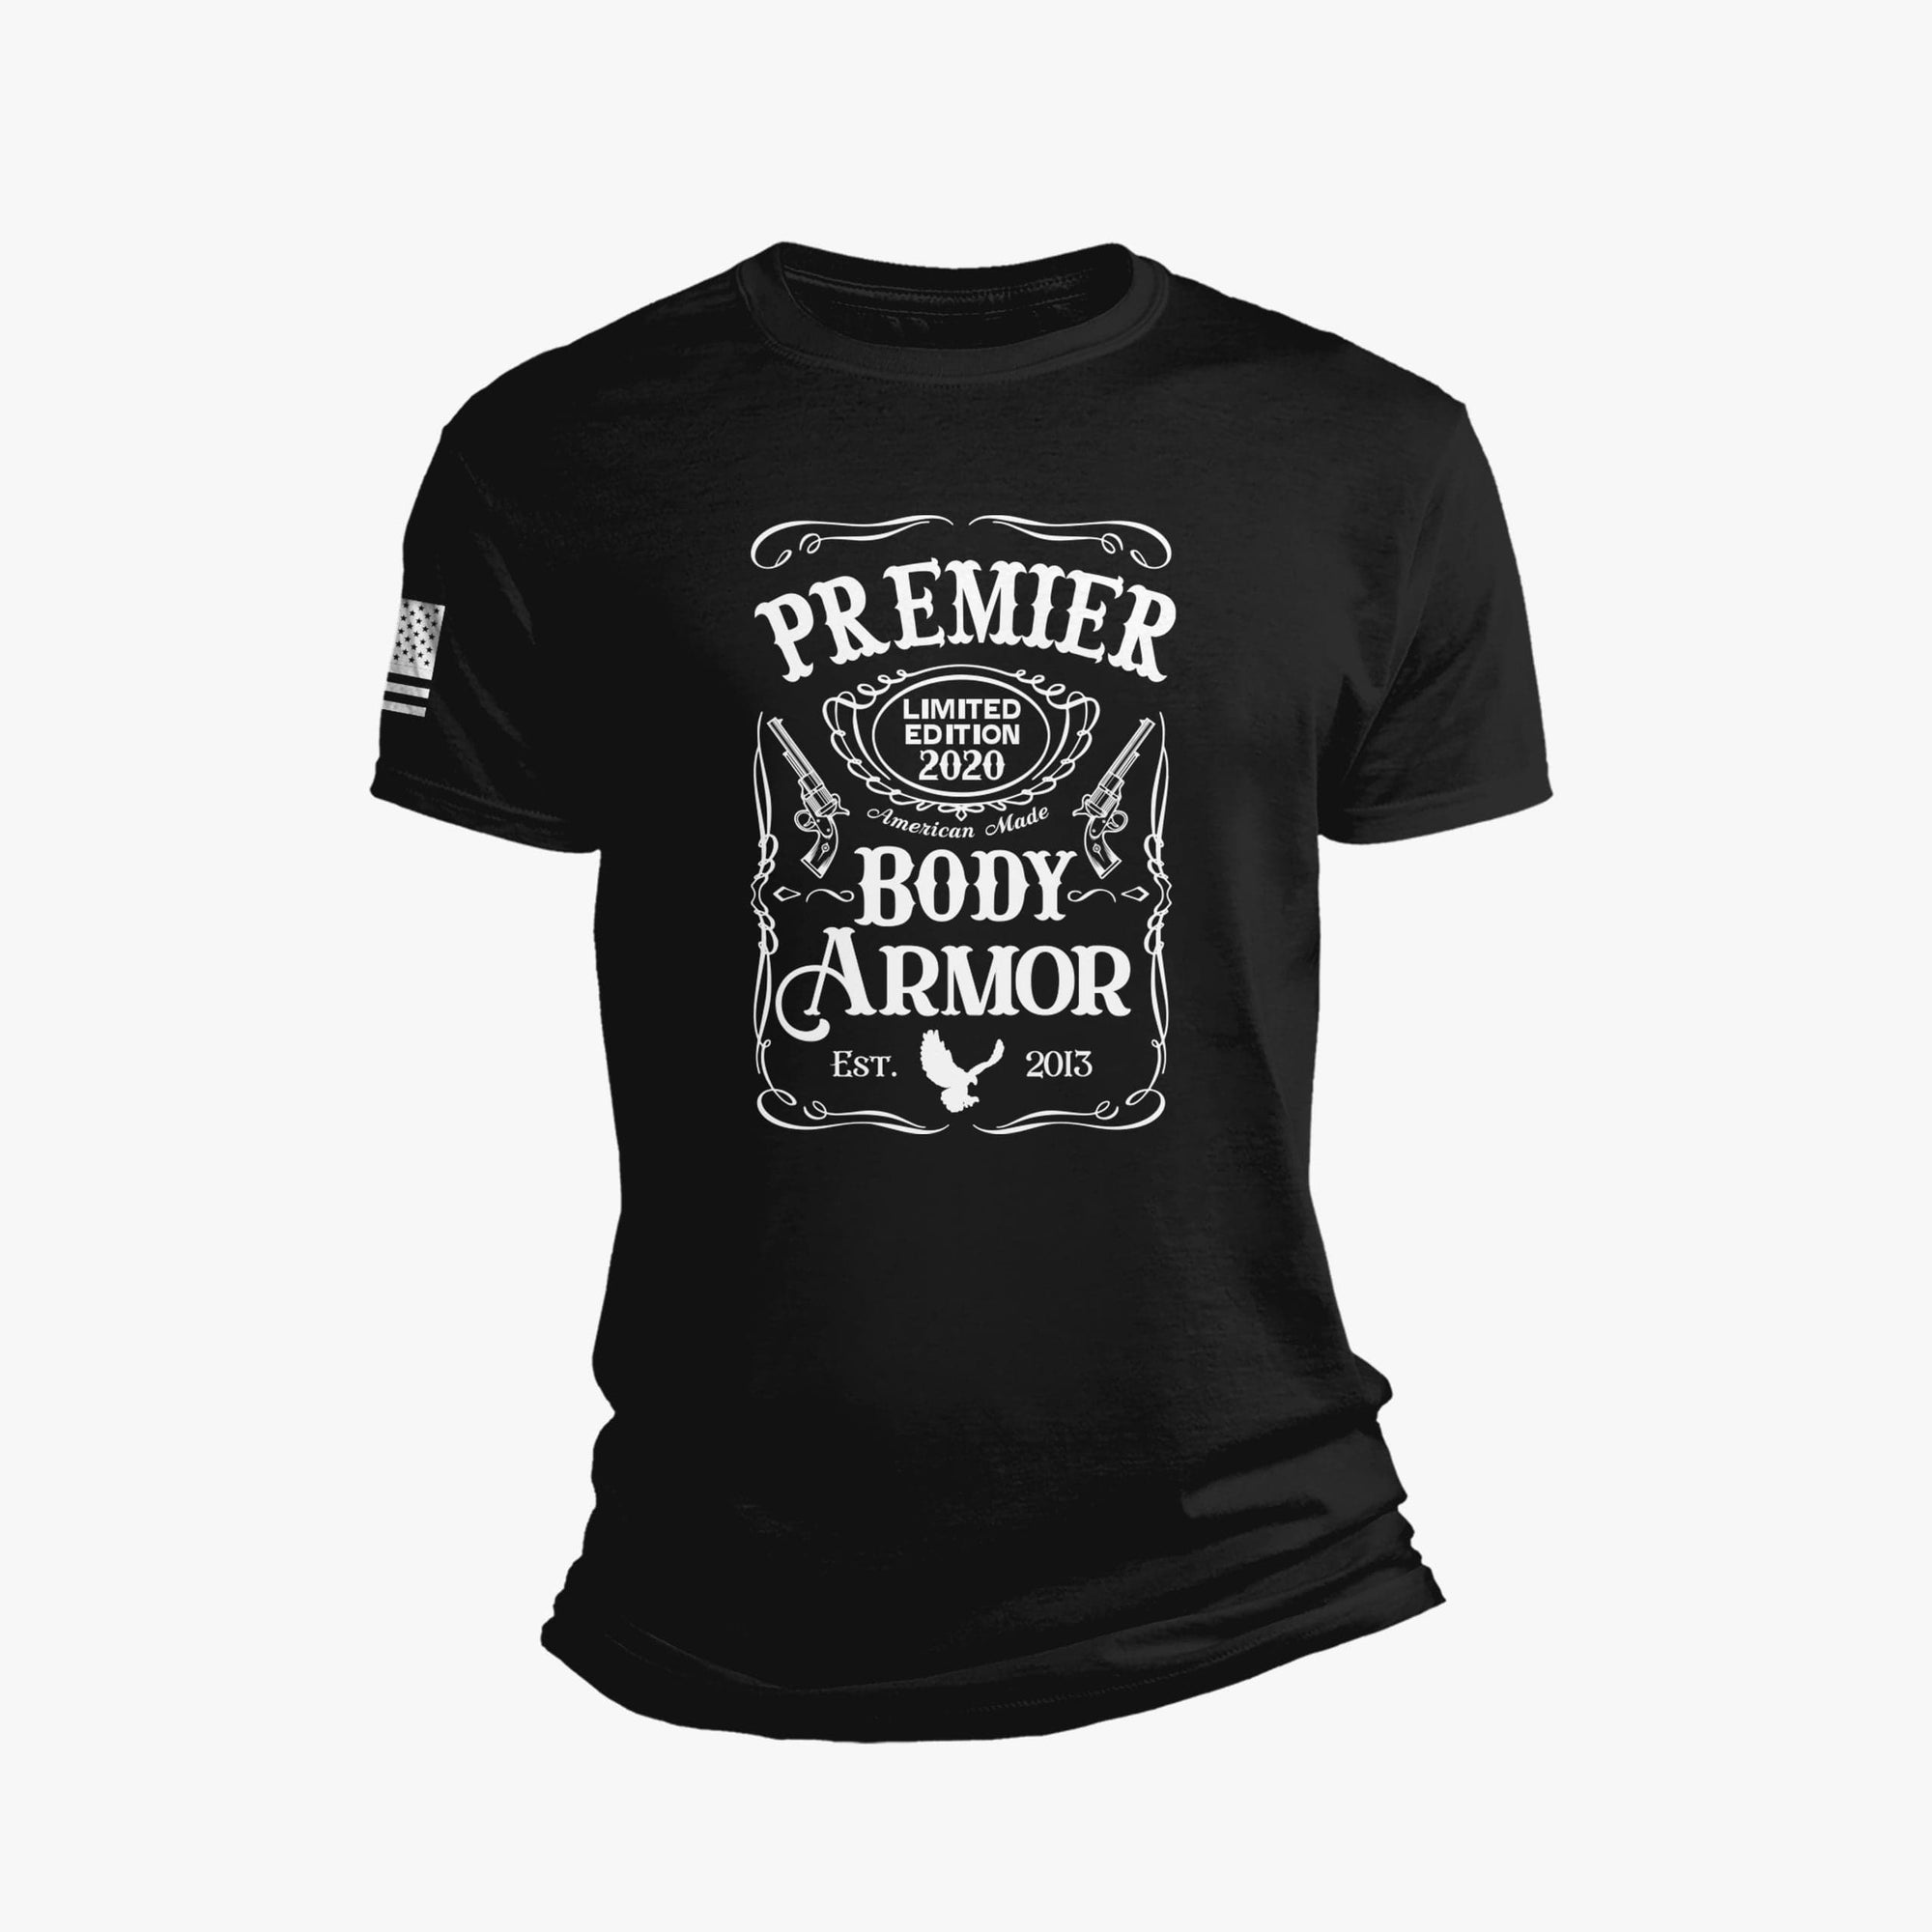 Image of Premier Body Armor Jack Daniel's limited edition t-shirt. This is not a bulletproof shirt. 